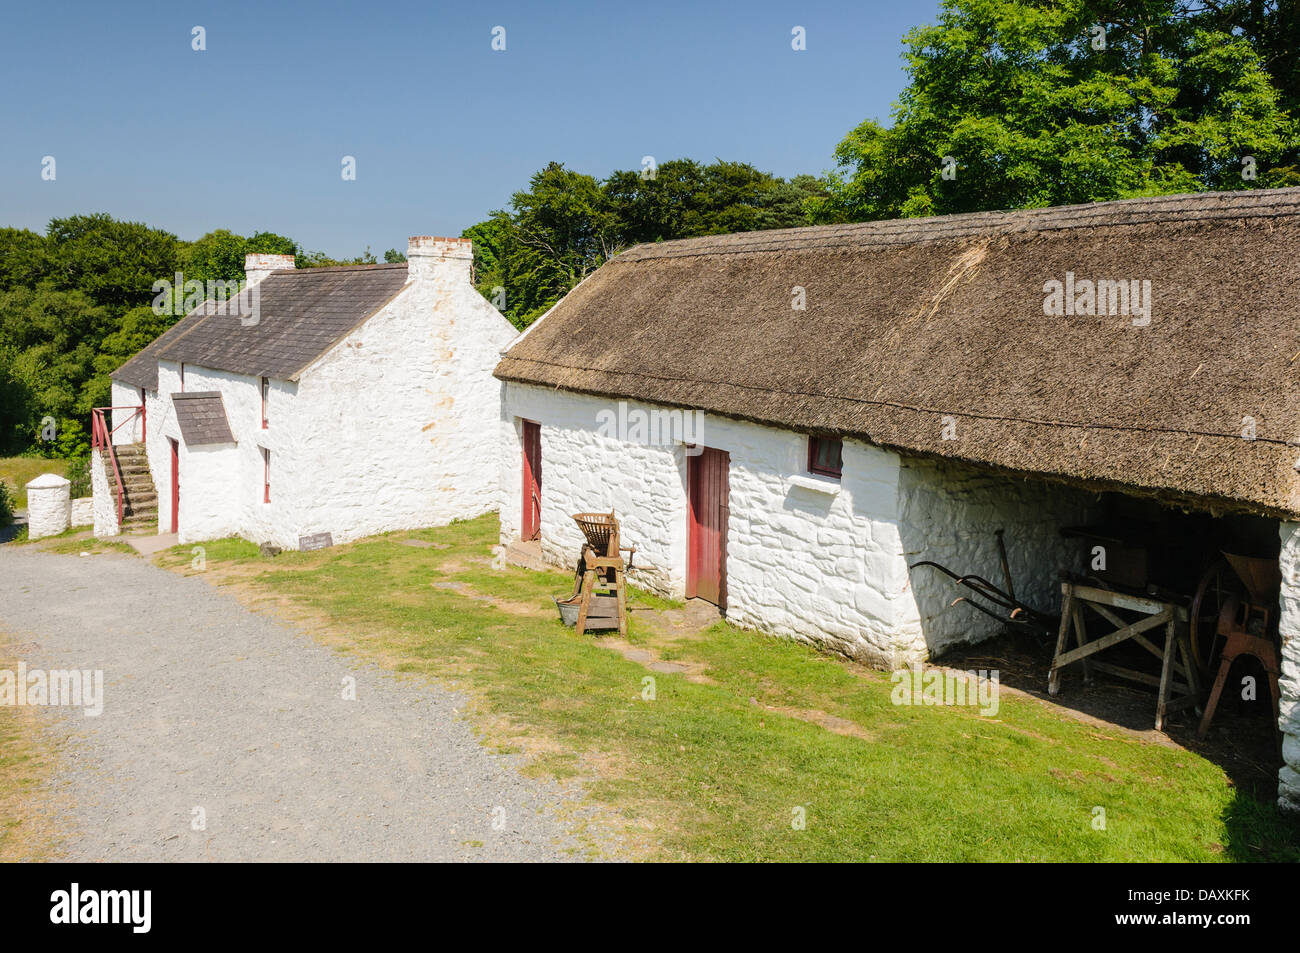 Traditional Irish farm with whitewashed walls and thatched roof Stock Photo